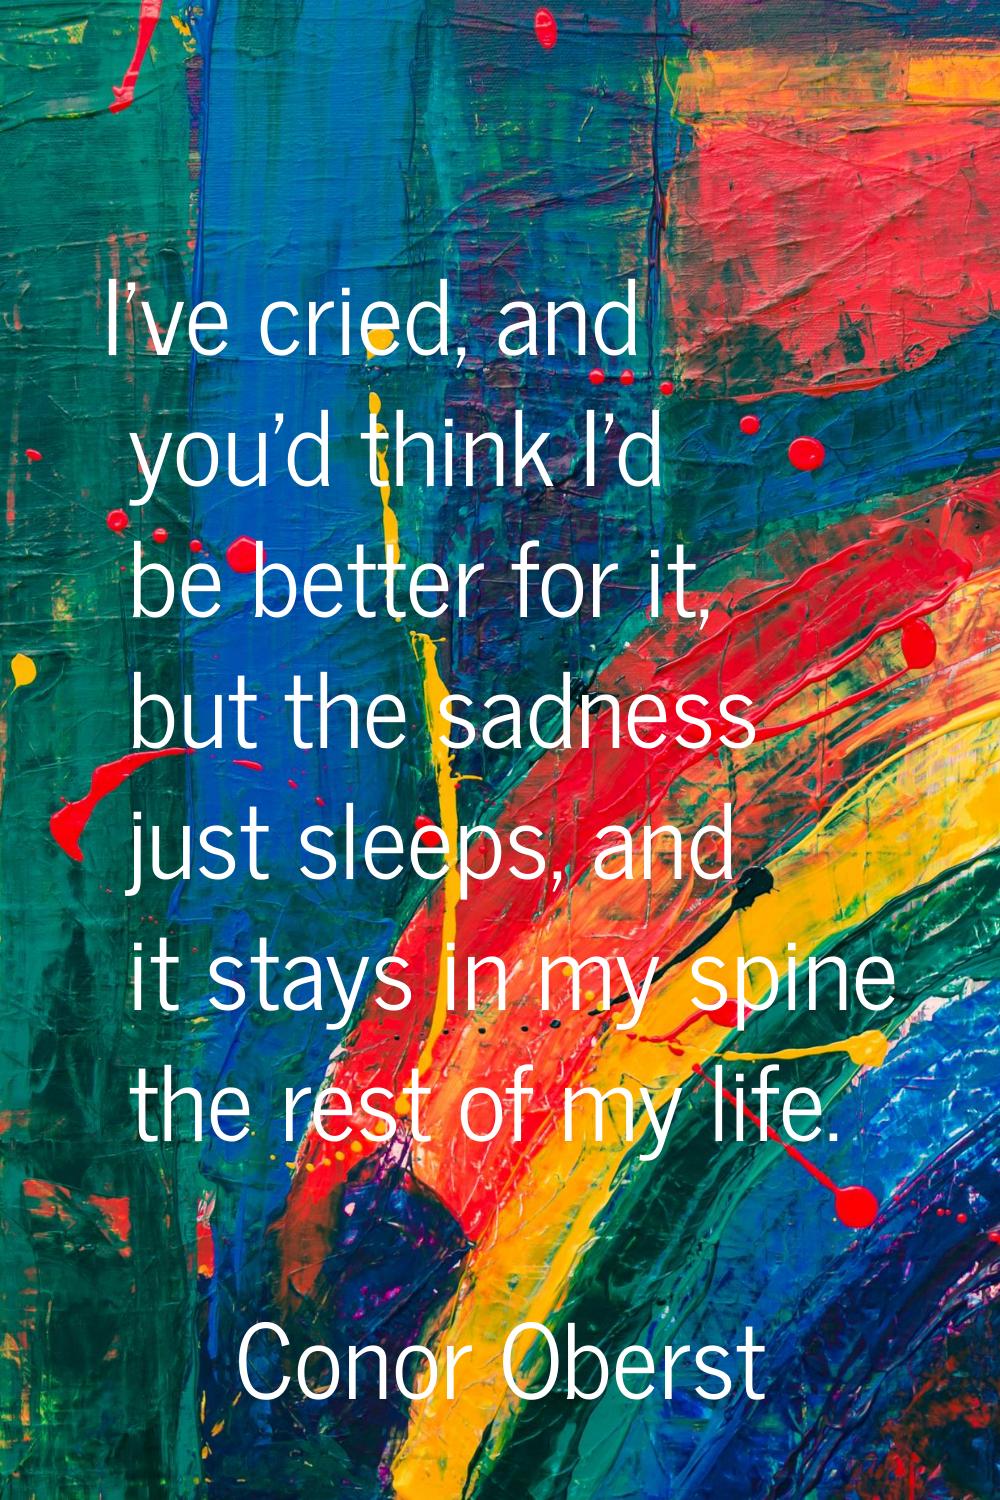 I've cried, and you'd think I'd be better for it, but the sadness just sleeps, and it stays in my s